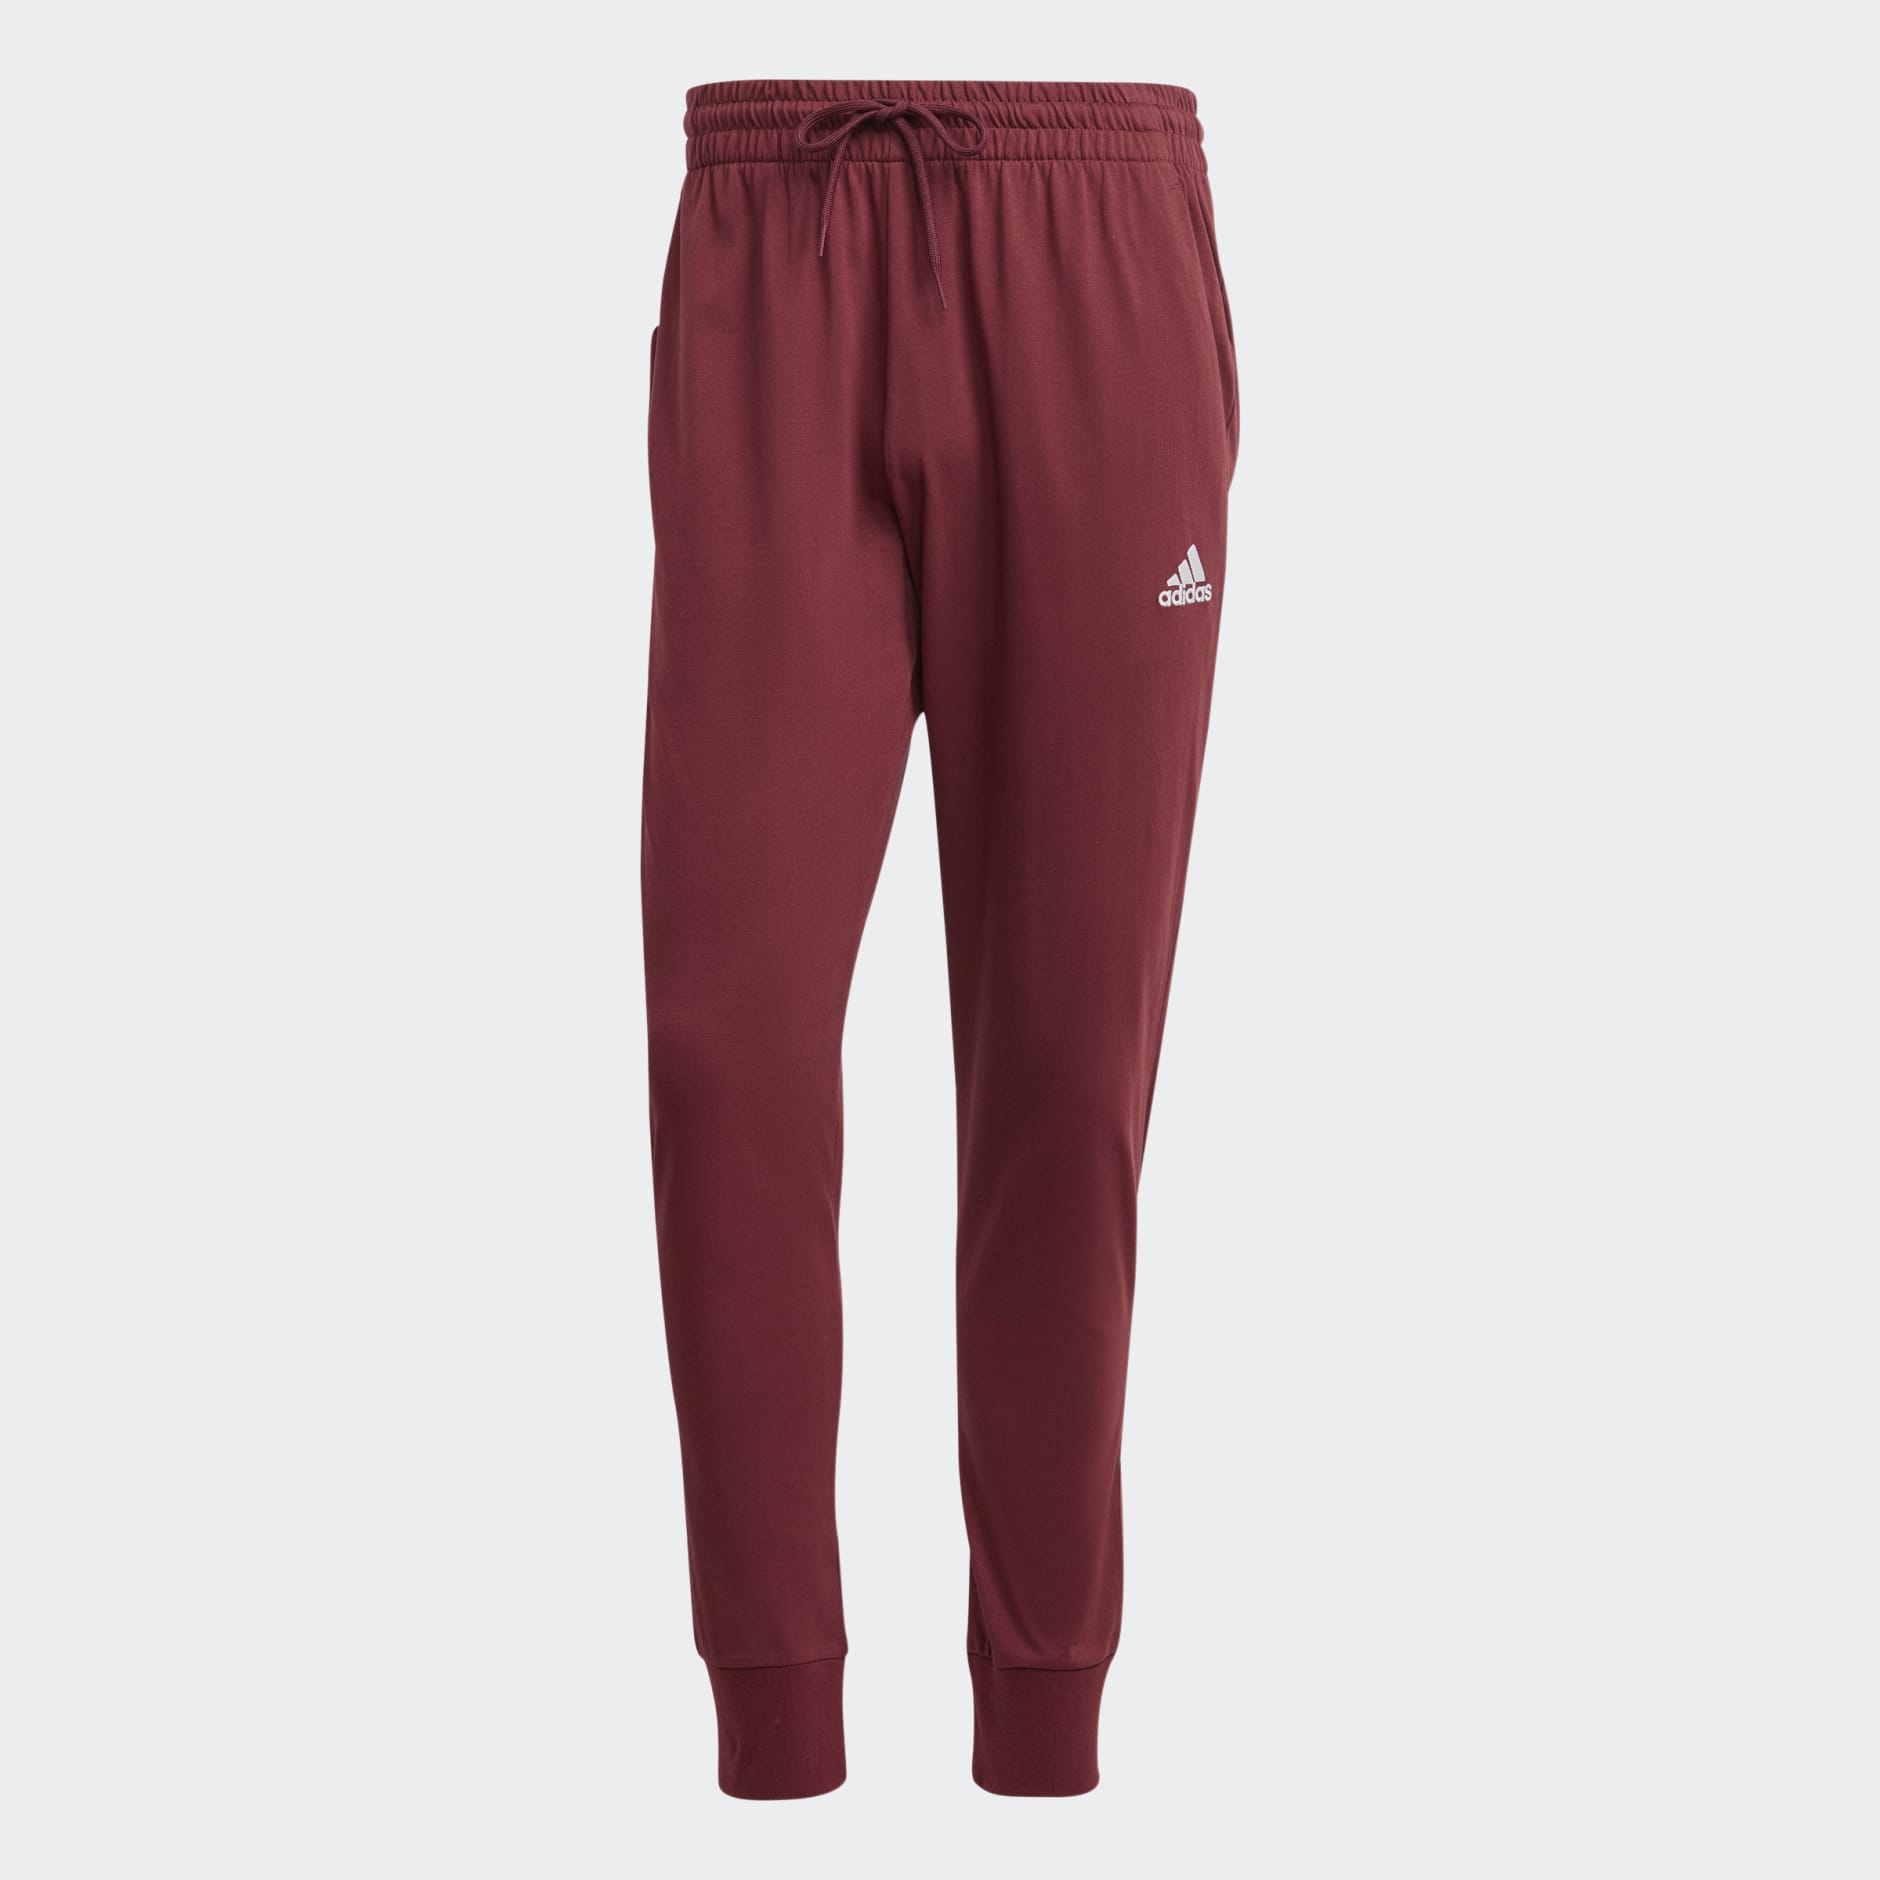 Men's Clothing - Essentials Single Jersey Tapered Cuff Pants - Burgundy ...